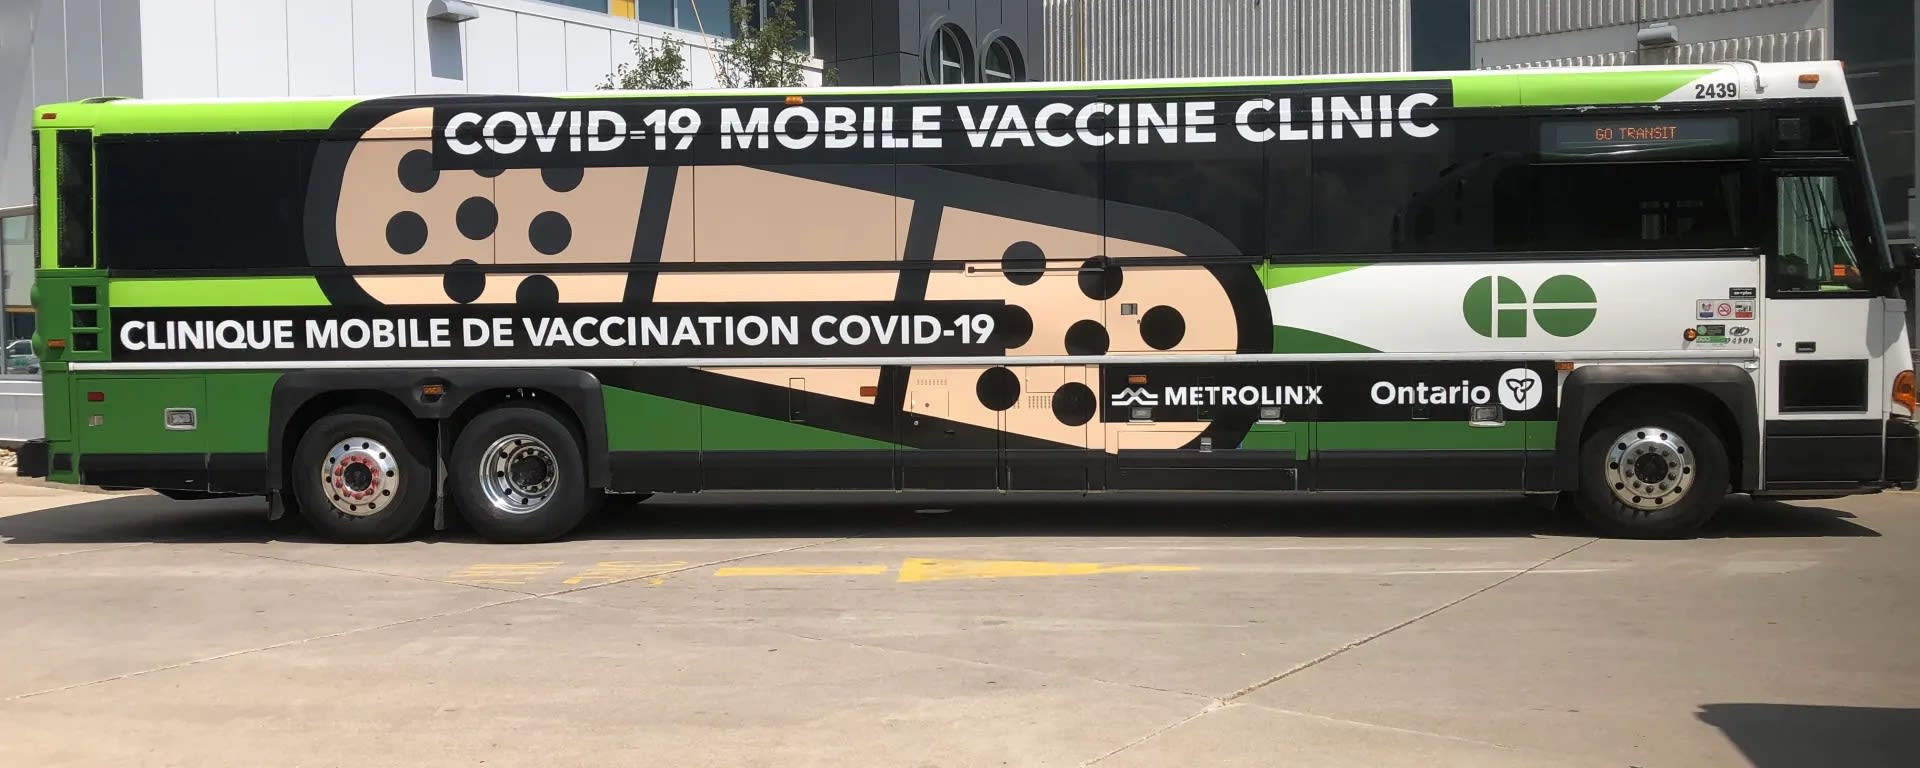 Two GO buses have been retrofitted into mobile vaccination clinics to visit various community hubs.